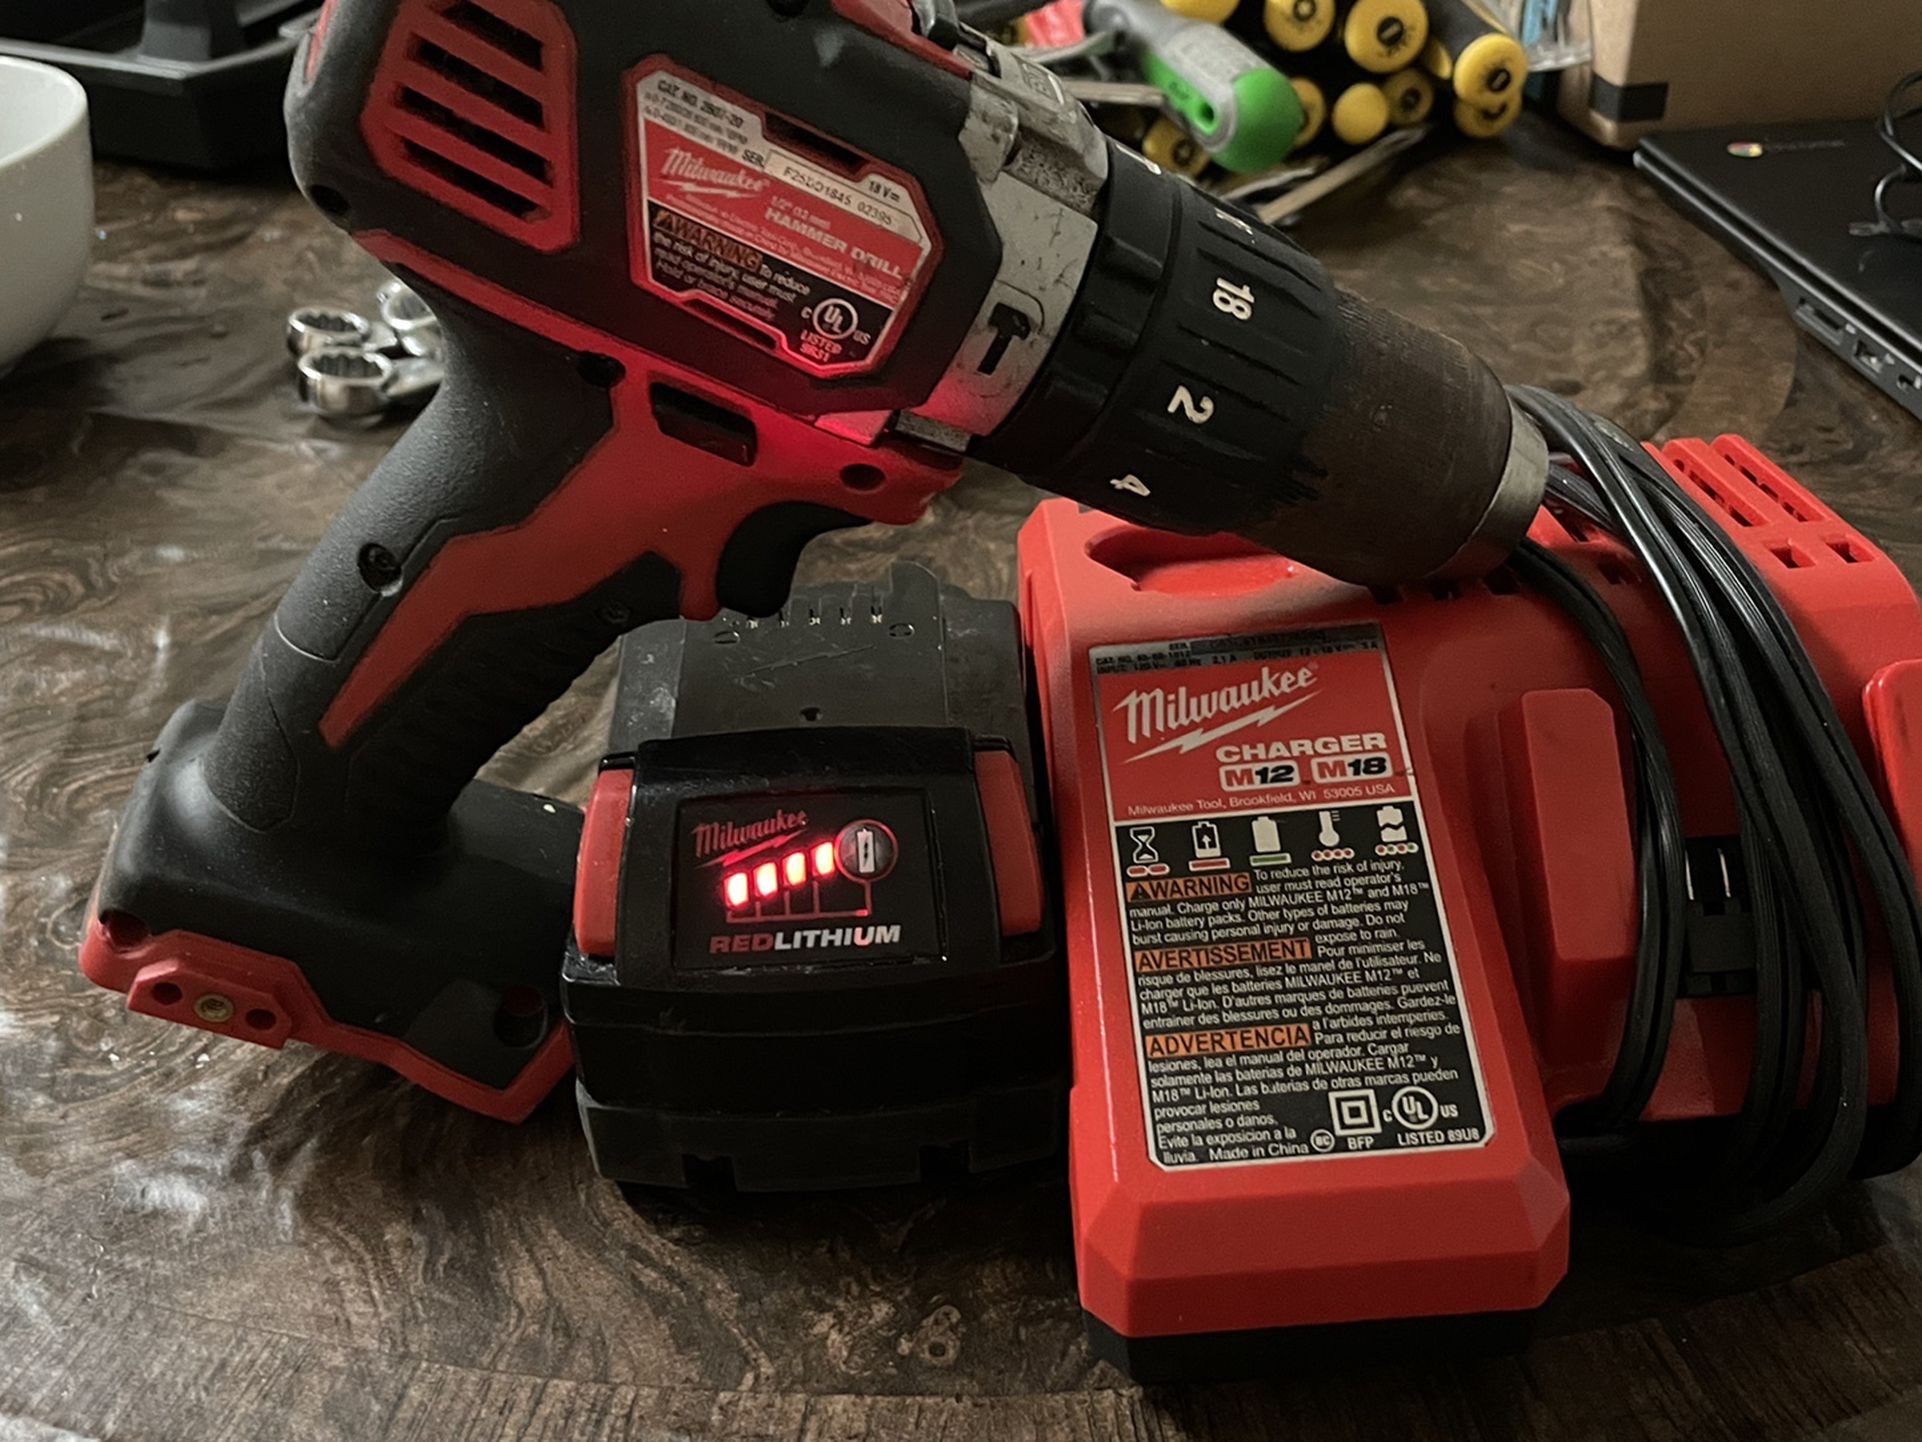 Milwaukee Drill Battery And Charger Dewalt Grinder Hyper Tough Saw Zaw And Drill With Chargers And 2 Batteries And Many Hand Tools And Tool Box